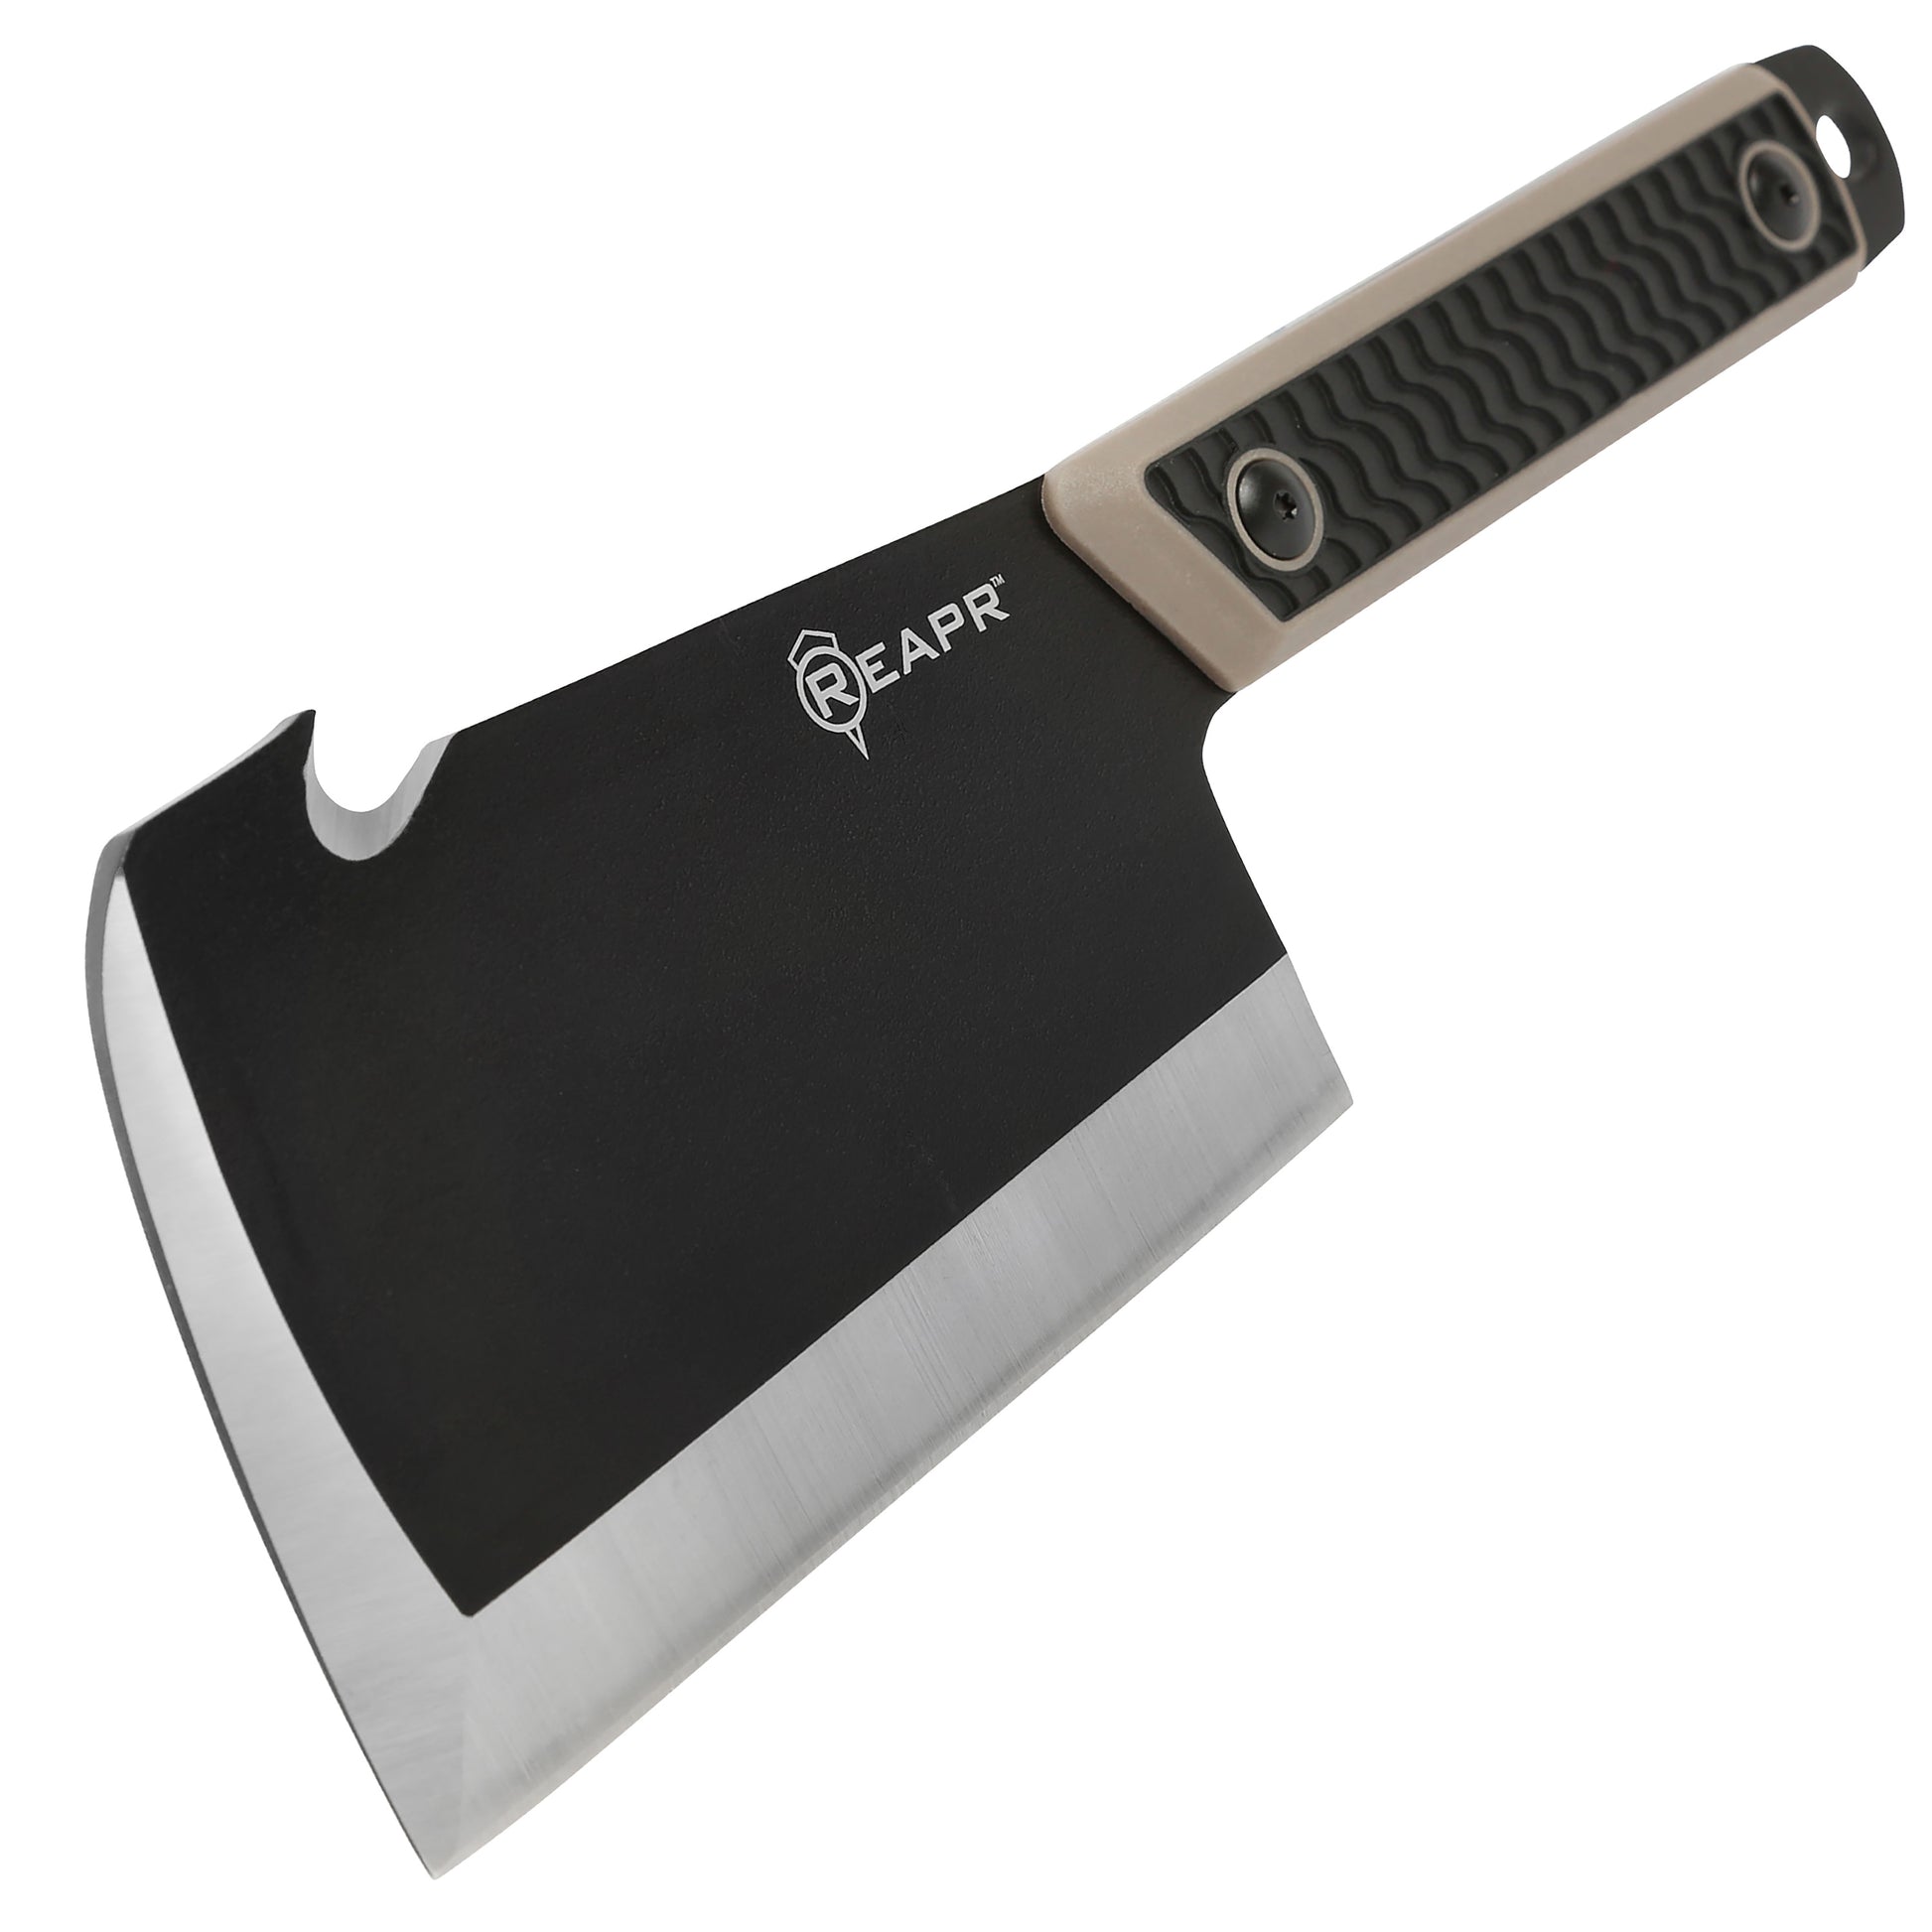 Reapr 11015  Versa CLEAVR knife for hunting and outdoor butcher knife to process game.